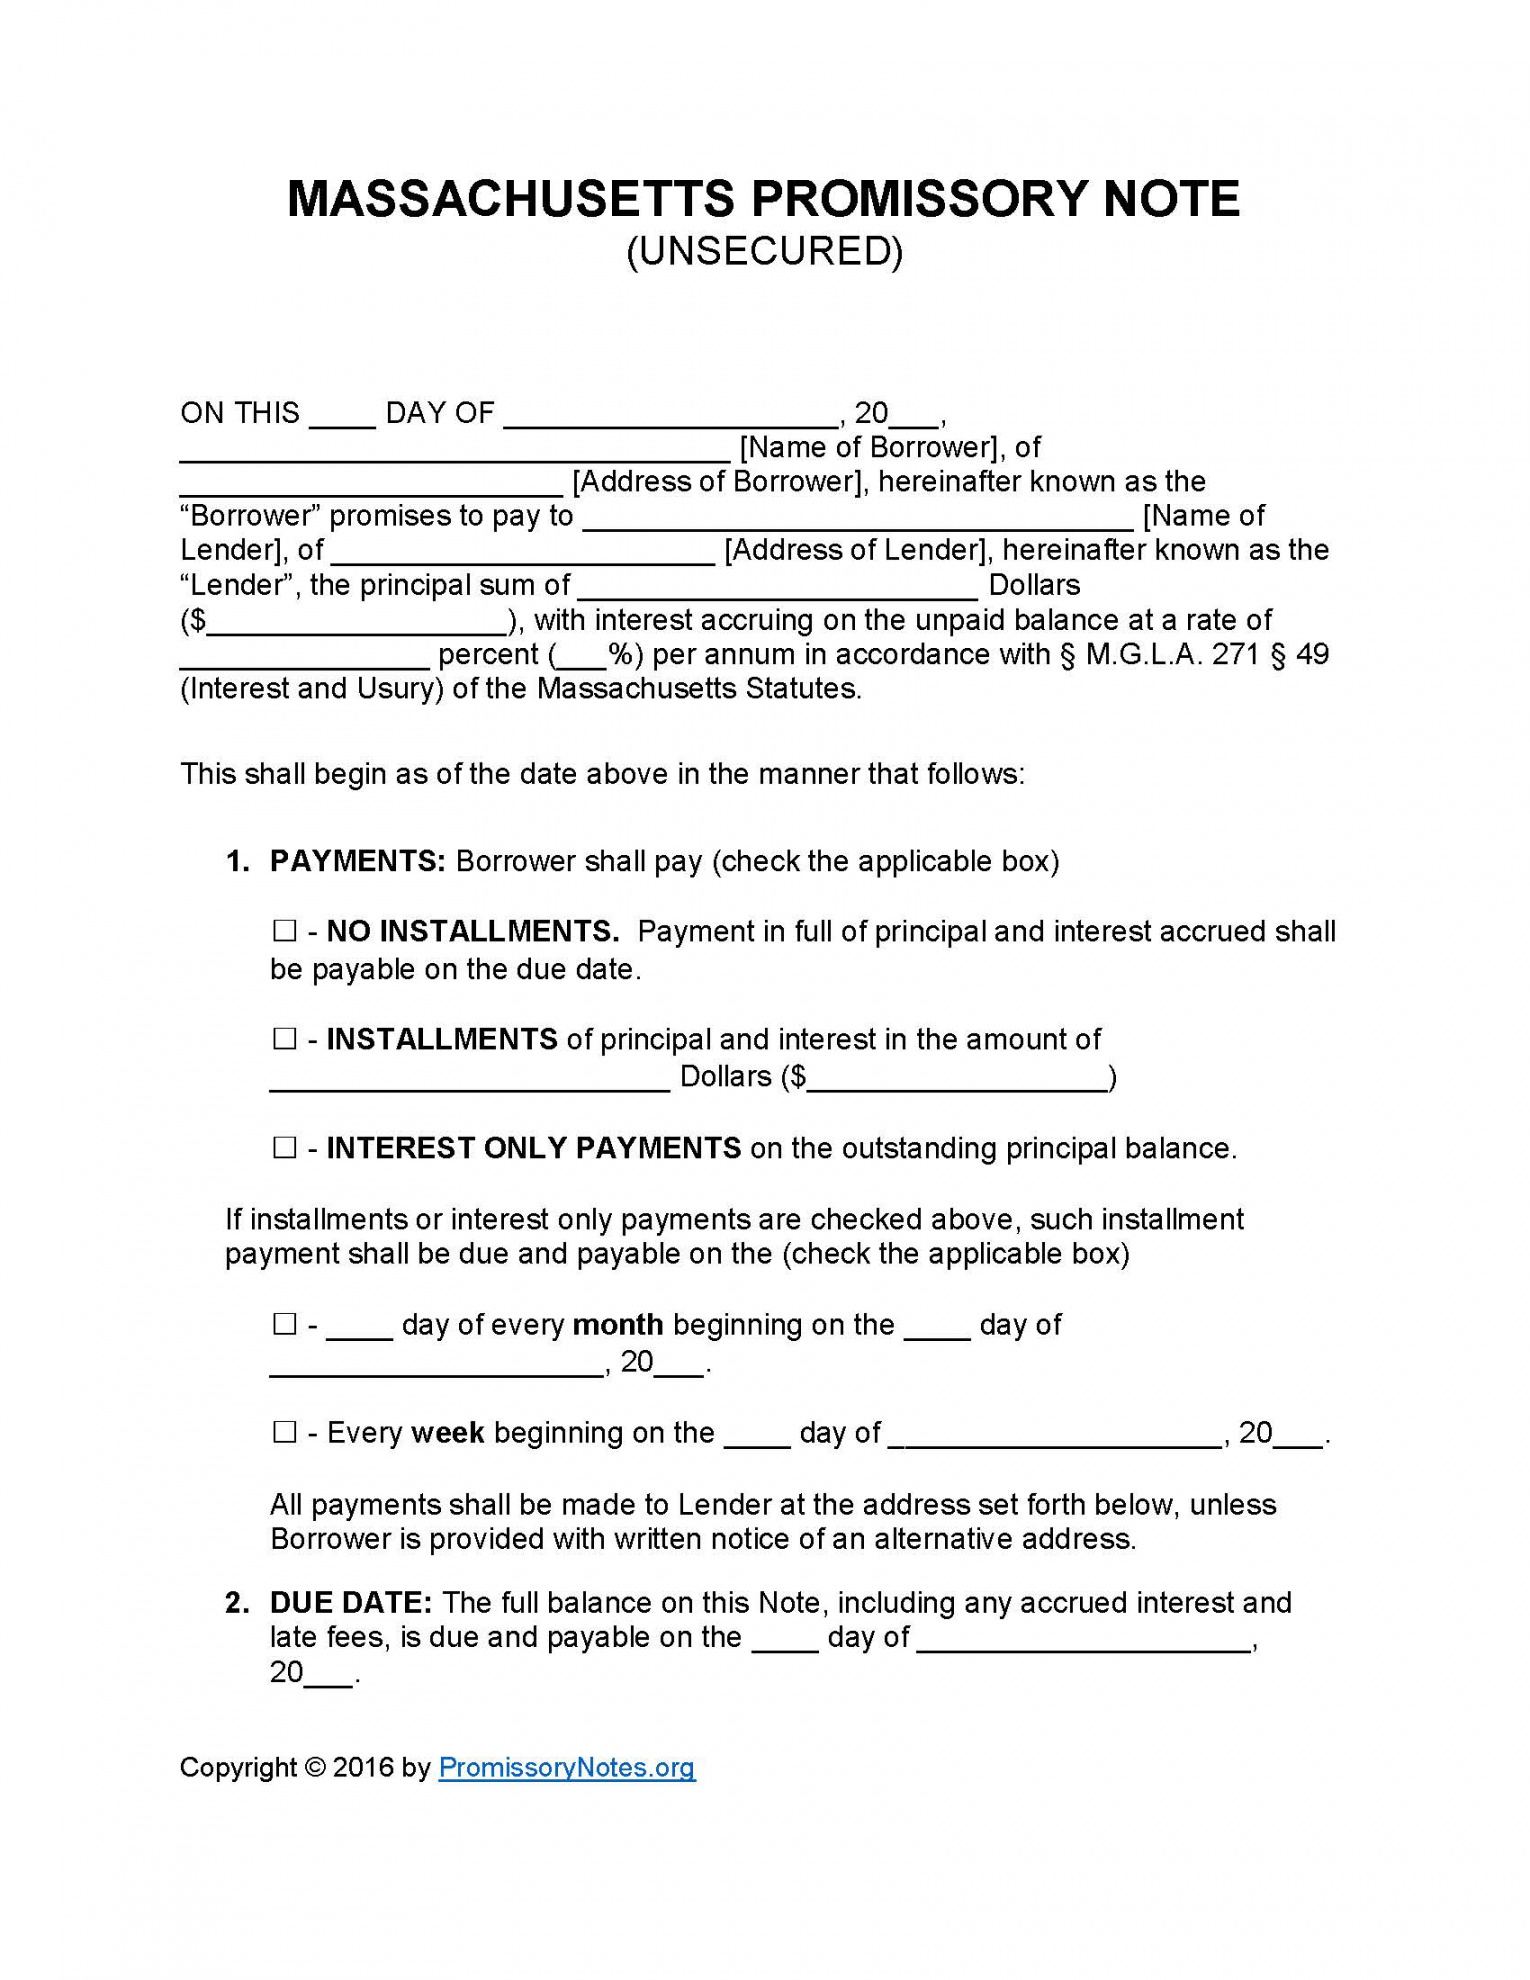 massachusetts unsecured promissory note template unsecured promissory note template pdf